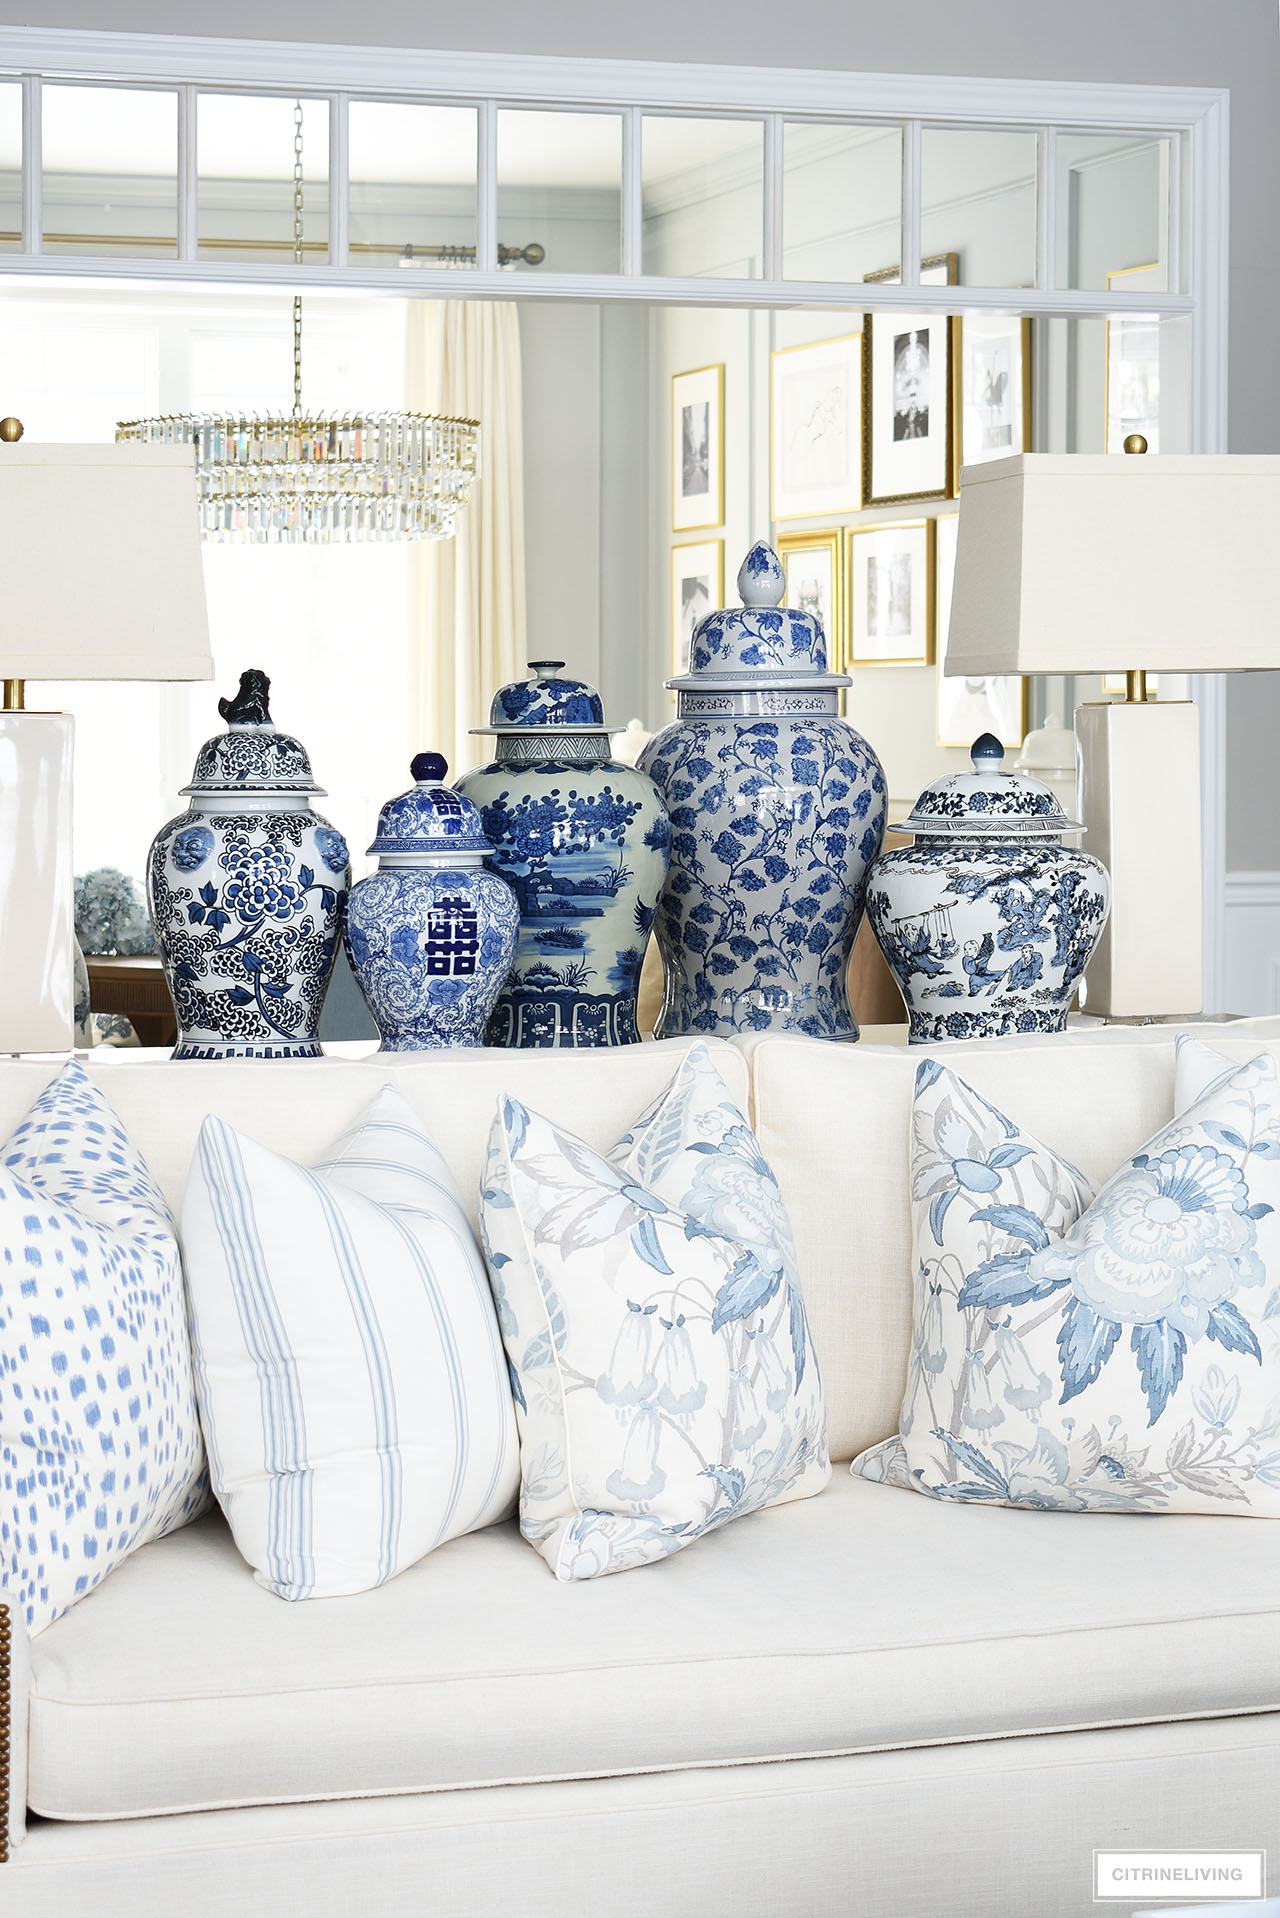 A beautiful collection of large blue and white ginger jars styled on a console behind designer throw pillows in floral, stripe and animal print patterns in blue and white.